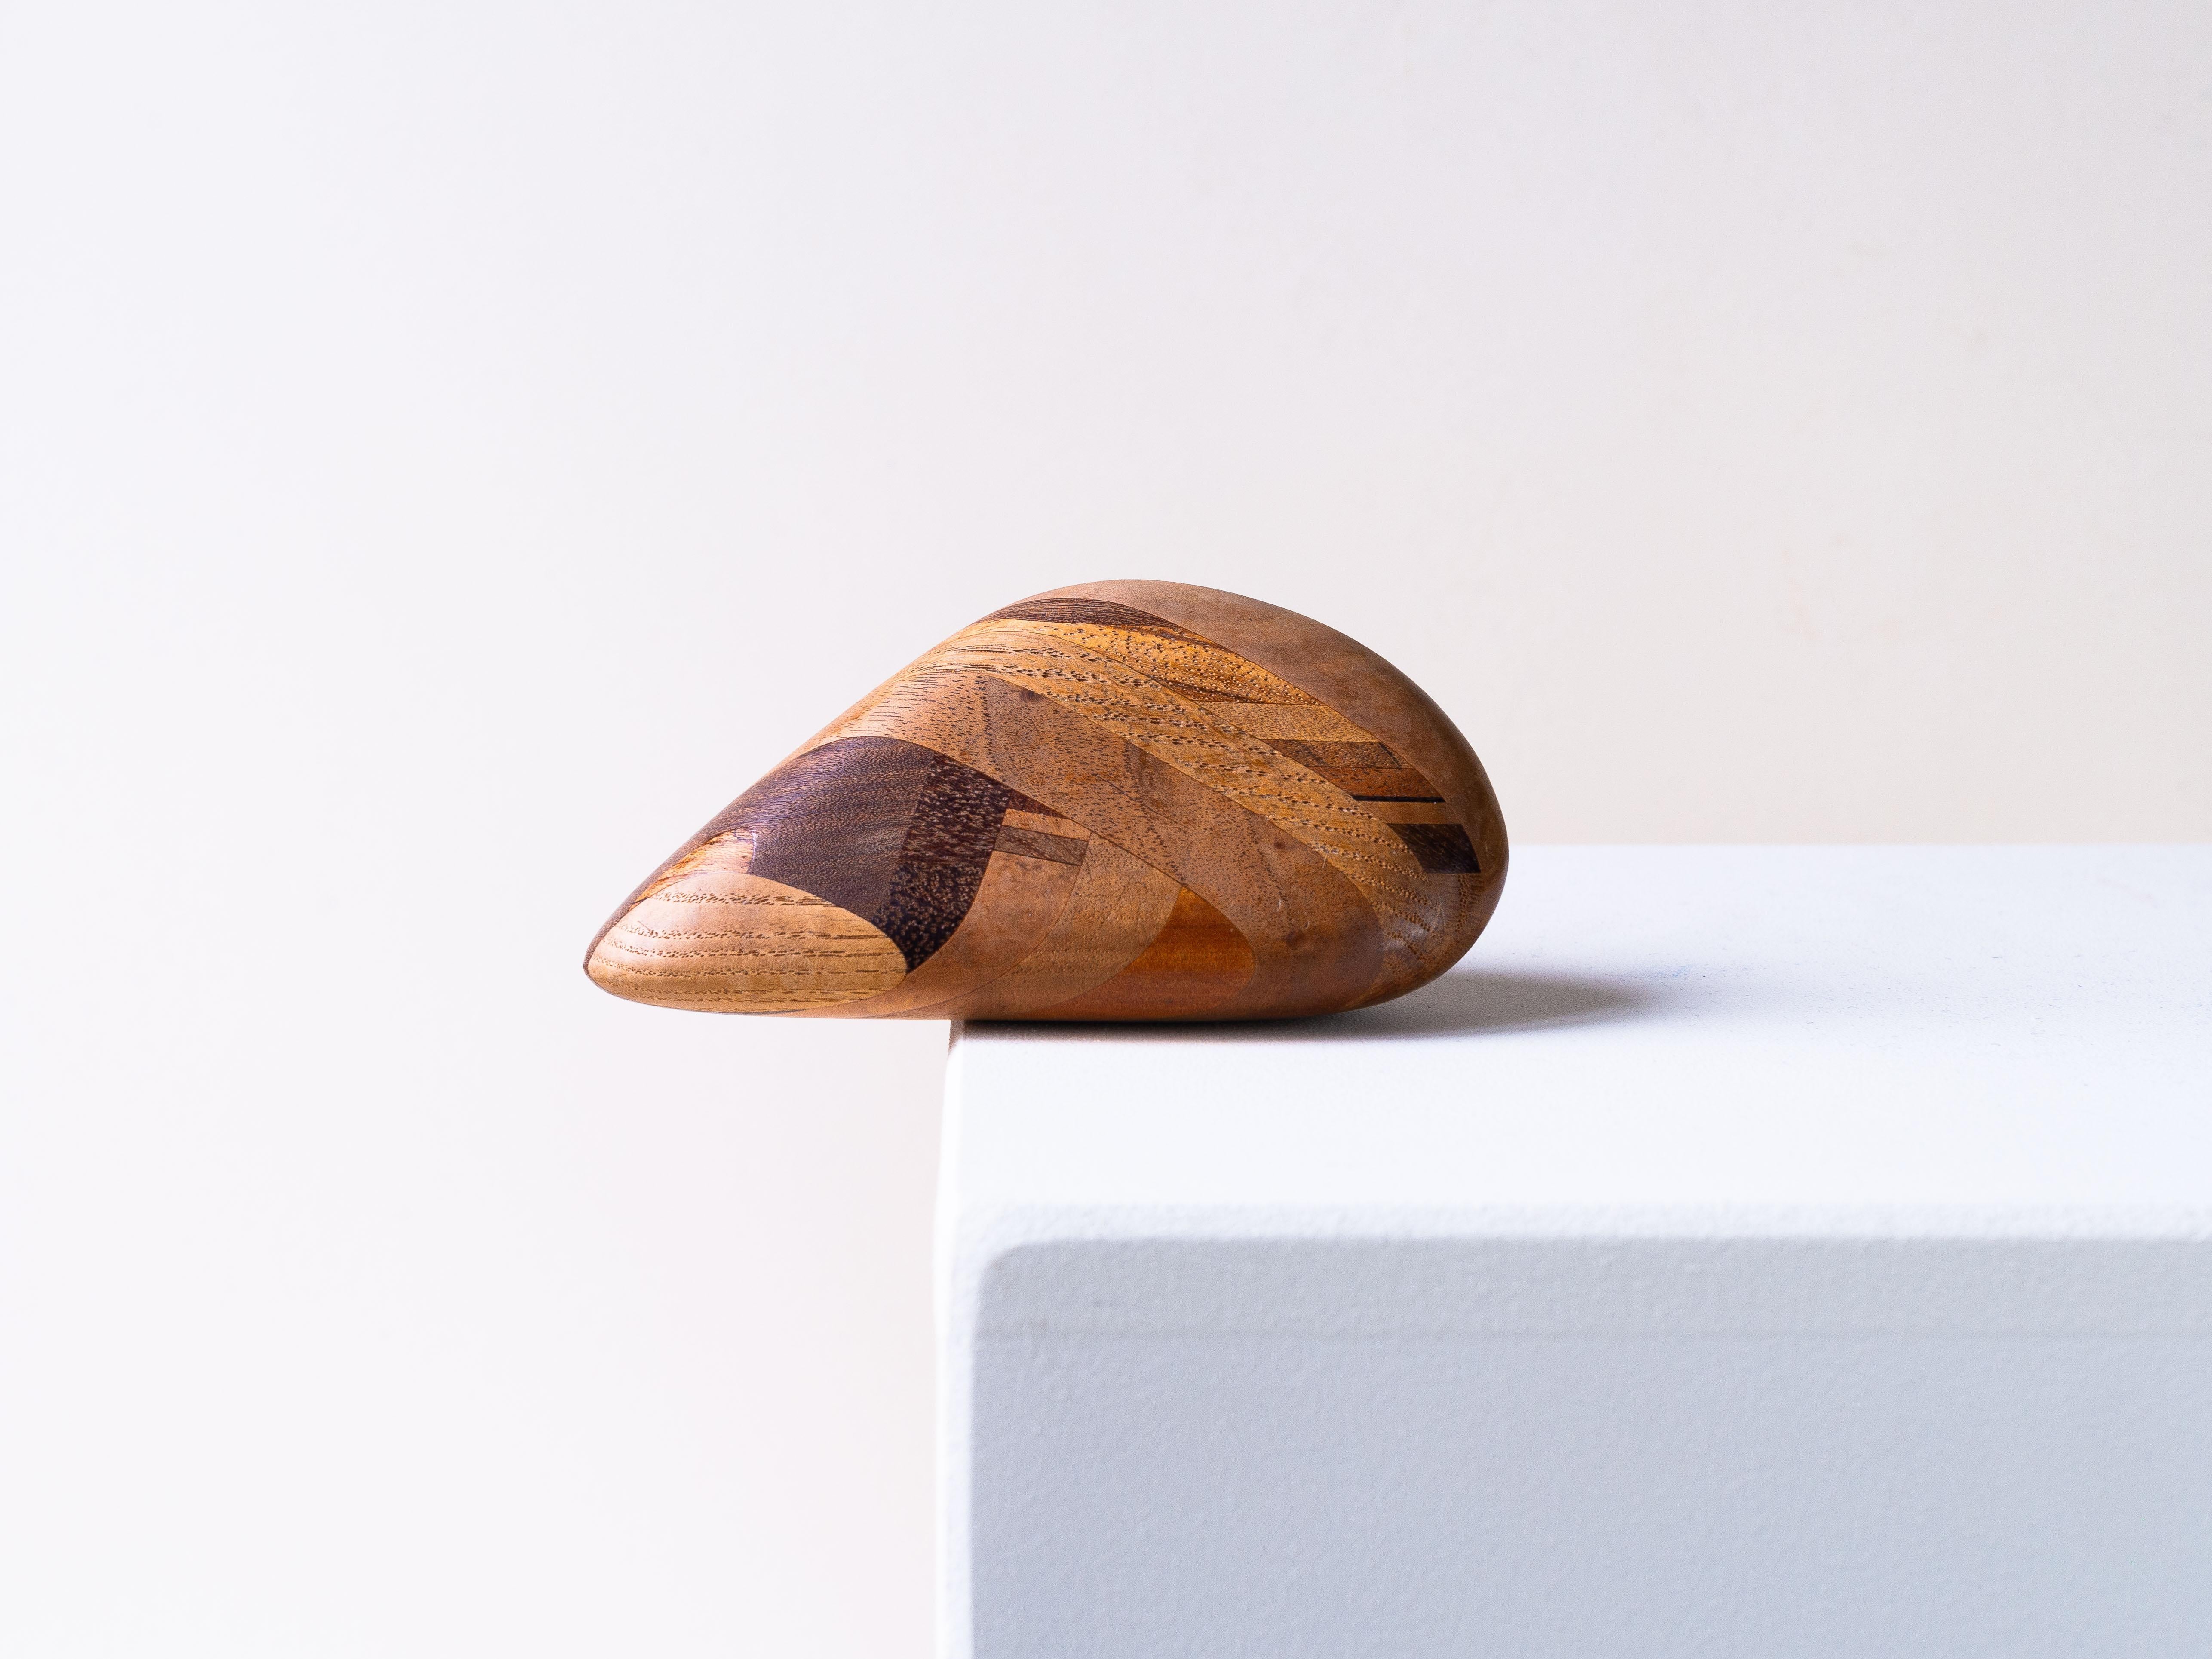 Wooden paperweight or decorative pebble sculpture.

From Denmark dating back to the 1970s.

The object is crafted from an assembly of different wood species. It employs a technique reminiscent of marquetry, but here it involves solid wood pieces